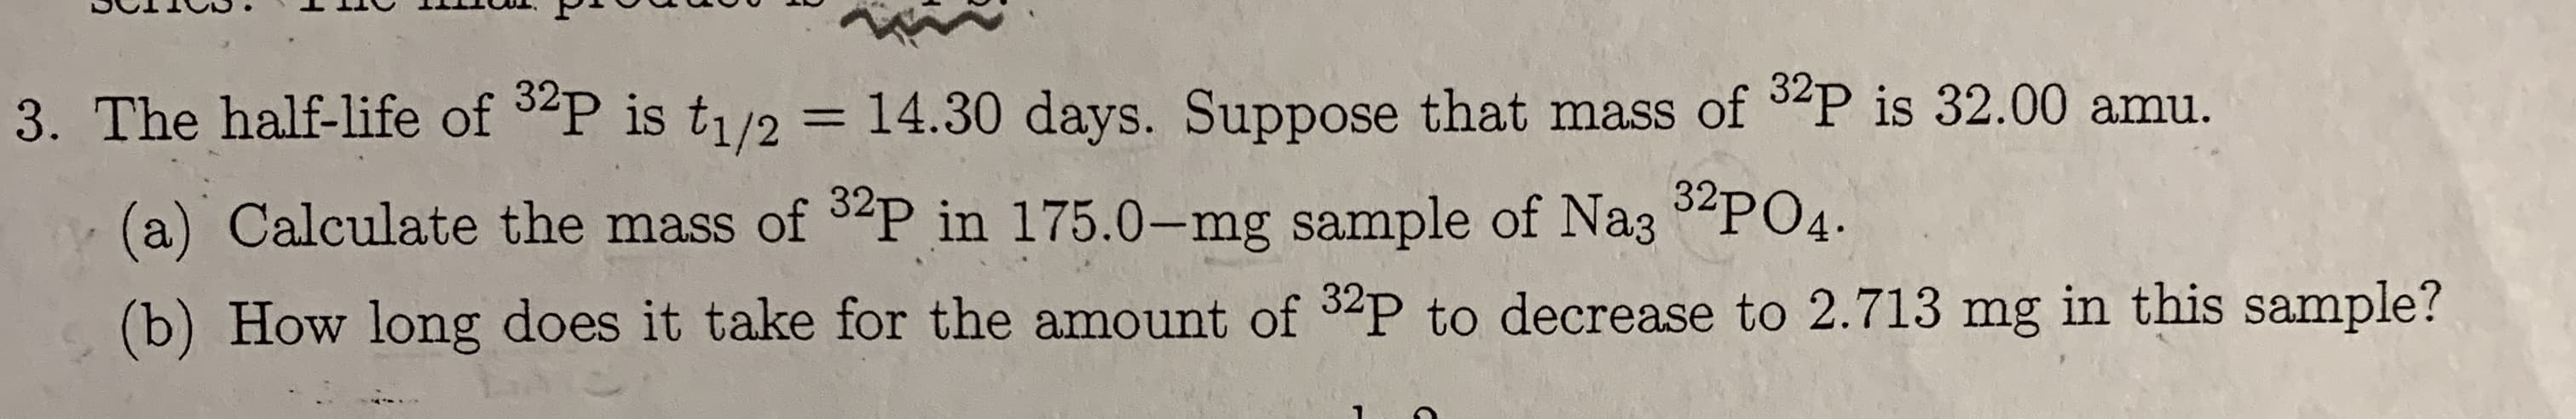 3. The half-life of 3P is t1/2 = 14.30 days. Suppose that mass of P is 32.00 amu.
(a) Calculate the mass of 2P in 175.0-mg sample of Na35PO4
(b) How long does it take for the amount of 32P to decrease to 2.713 mg in this sample?
